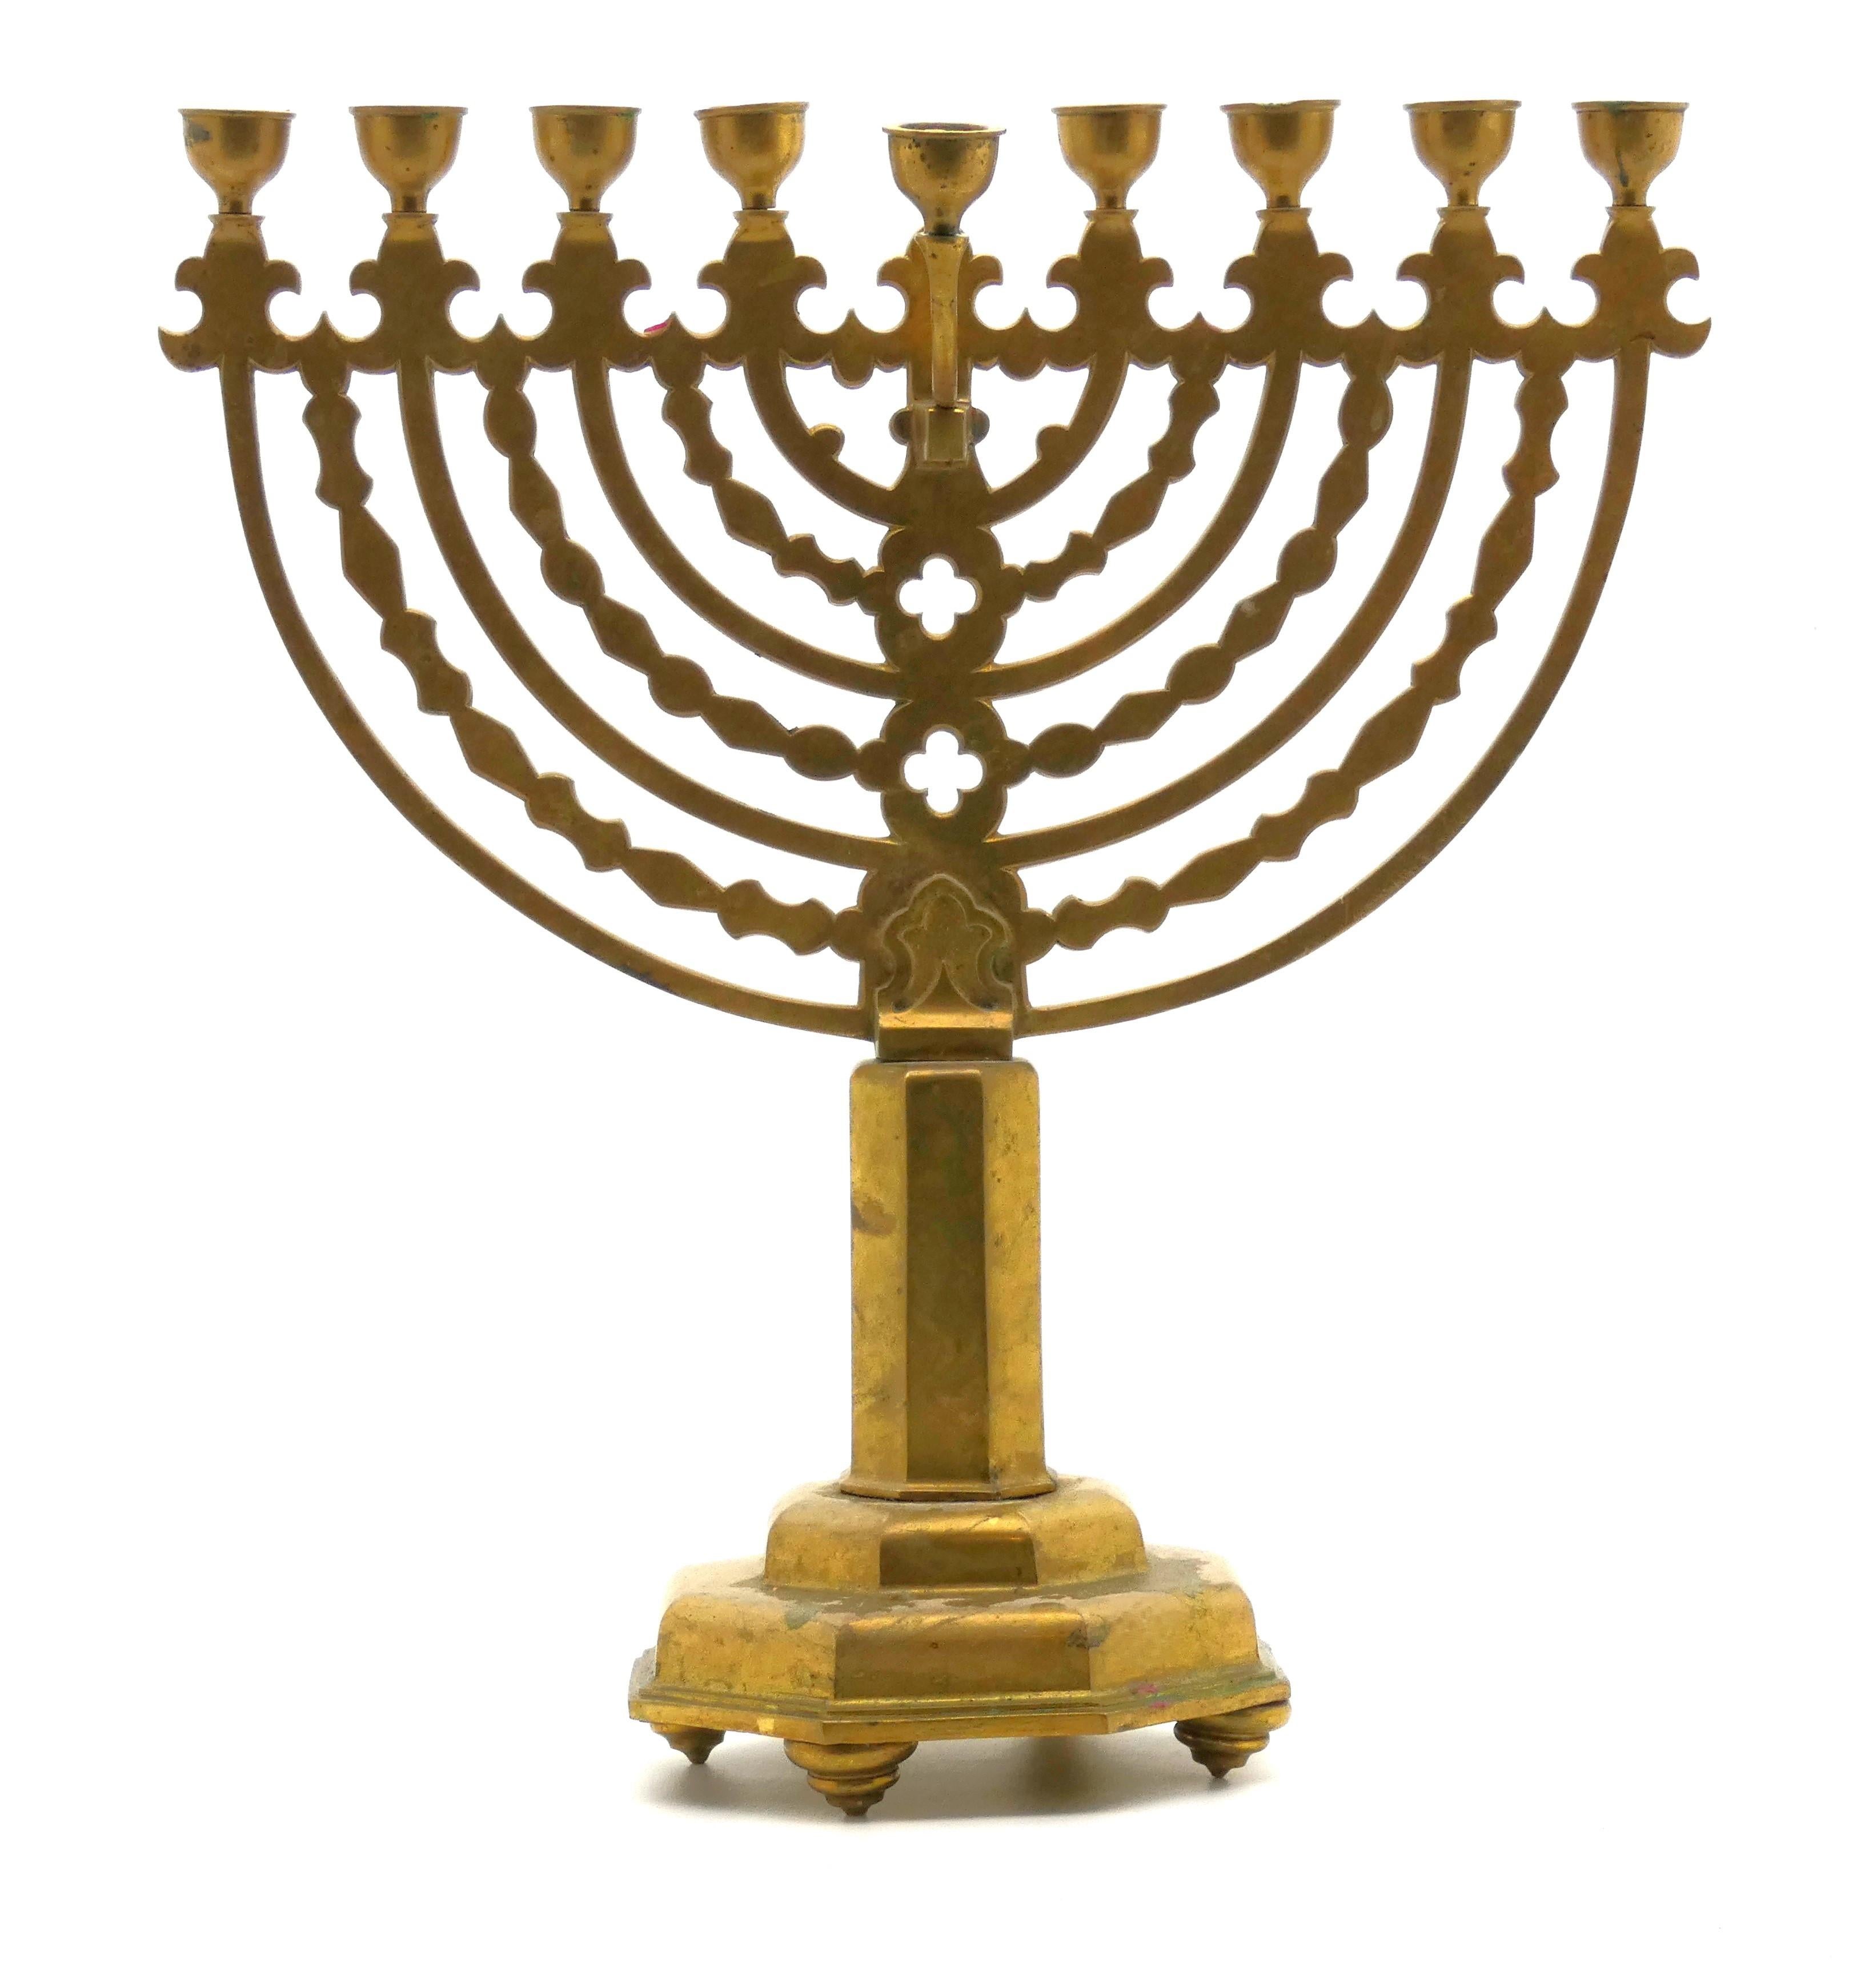 This Large German brass Menorah is indicative of the neo-gothic style of that period and suggests a date around the turn of the twentieth century.

Hanukkah menorah rests on an octagonal stepped base supported by four flywheel-shaped legs. 

Base is